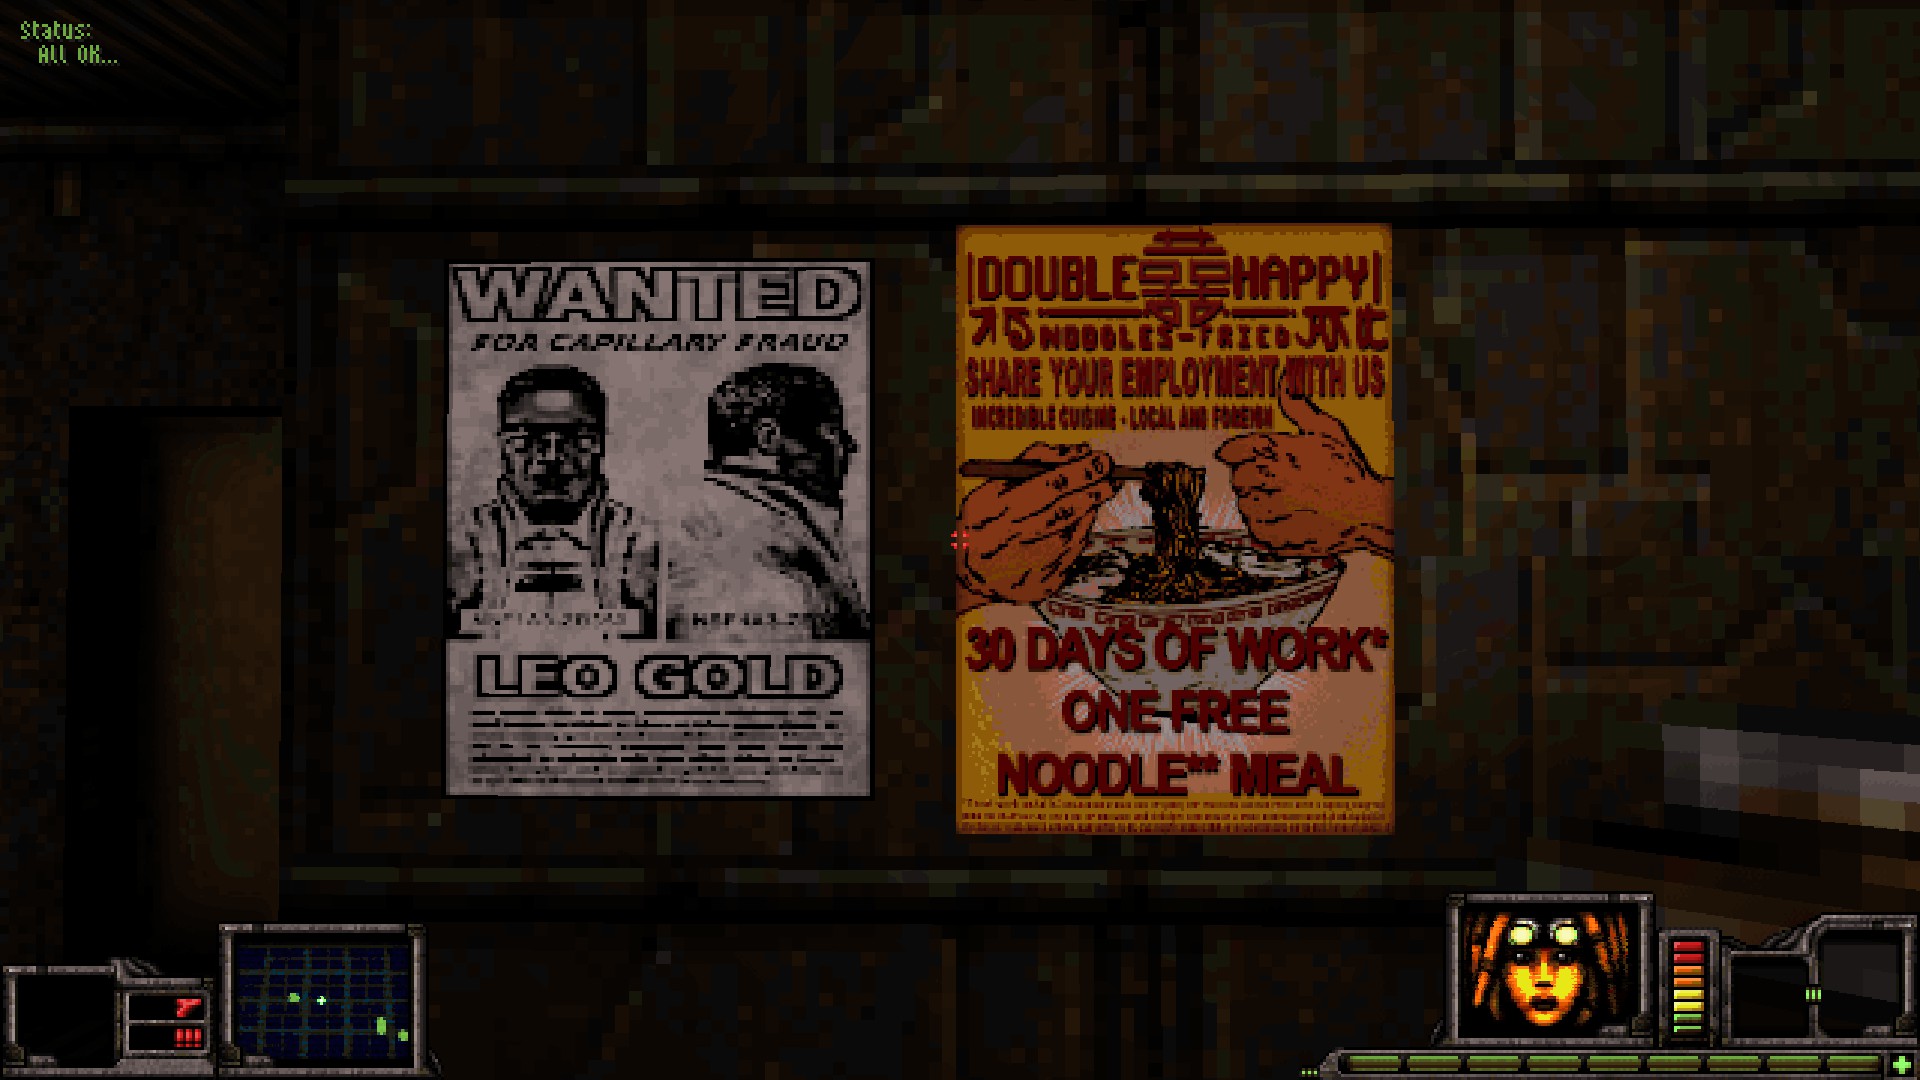 Deus Ex reference in Fortune's Run: Wanted poster for "Leo Gold" an antagonist from DX's Liberty Island mission